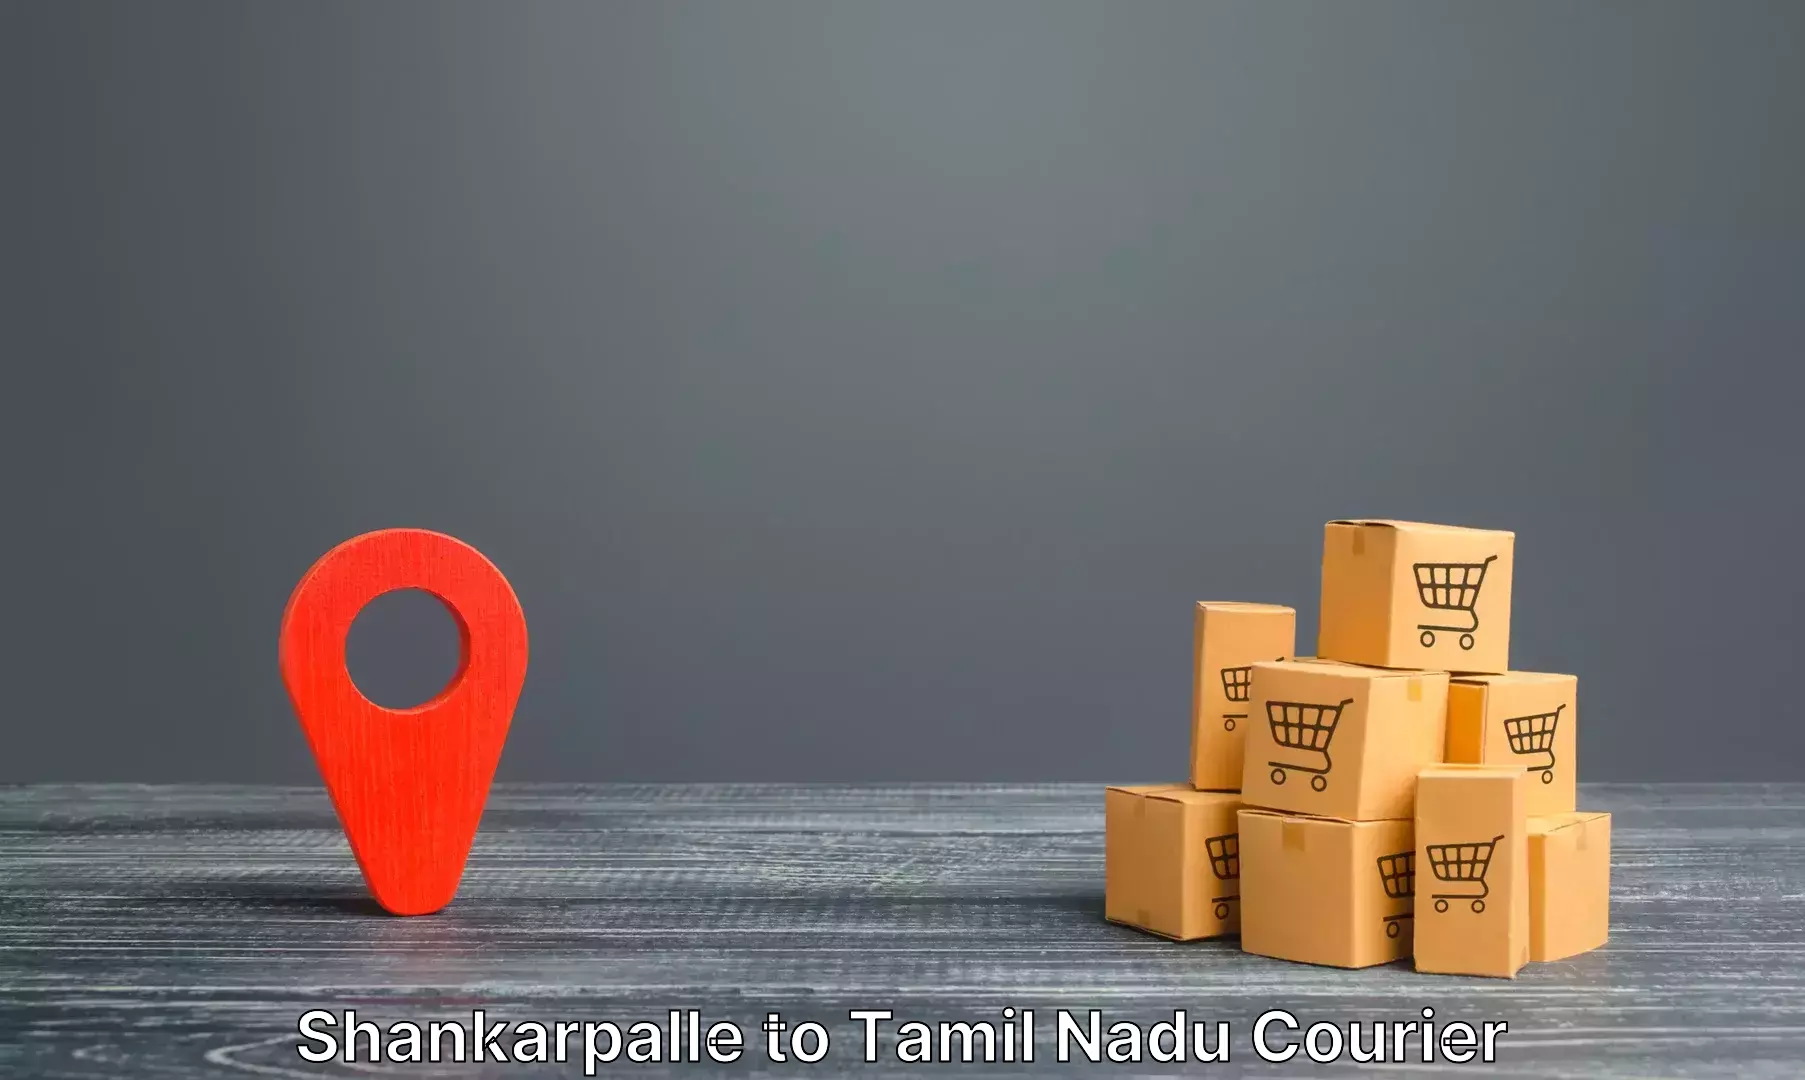 Luggage shipping specialists Shankarpalle to Sriperumbudur